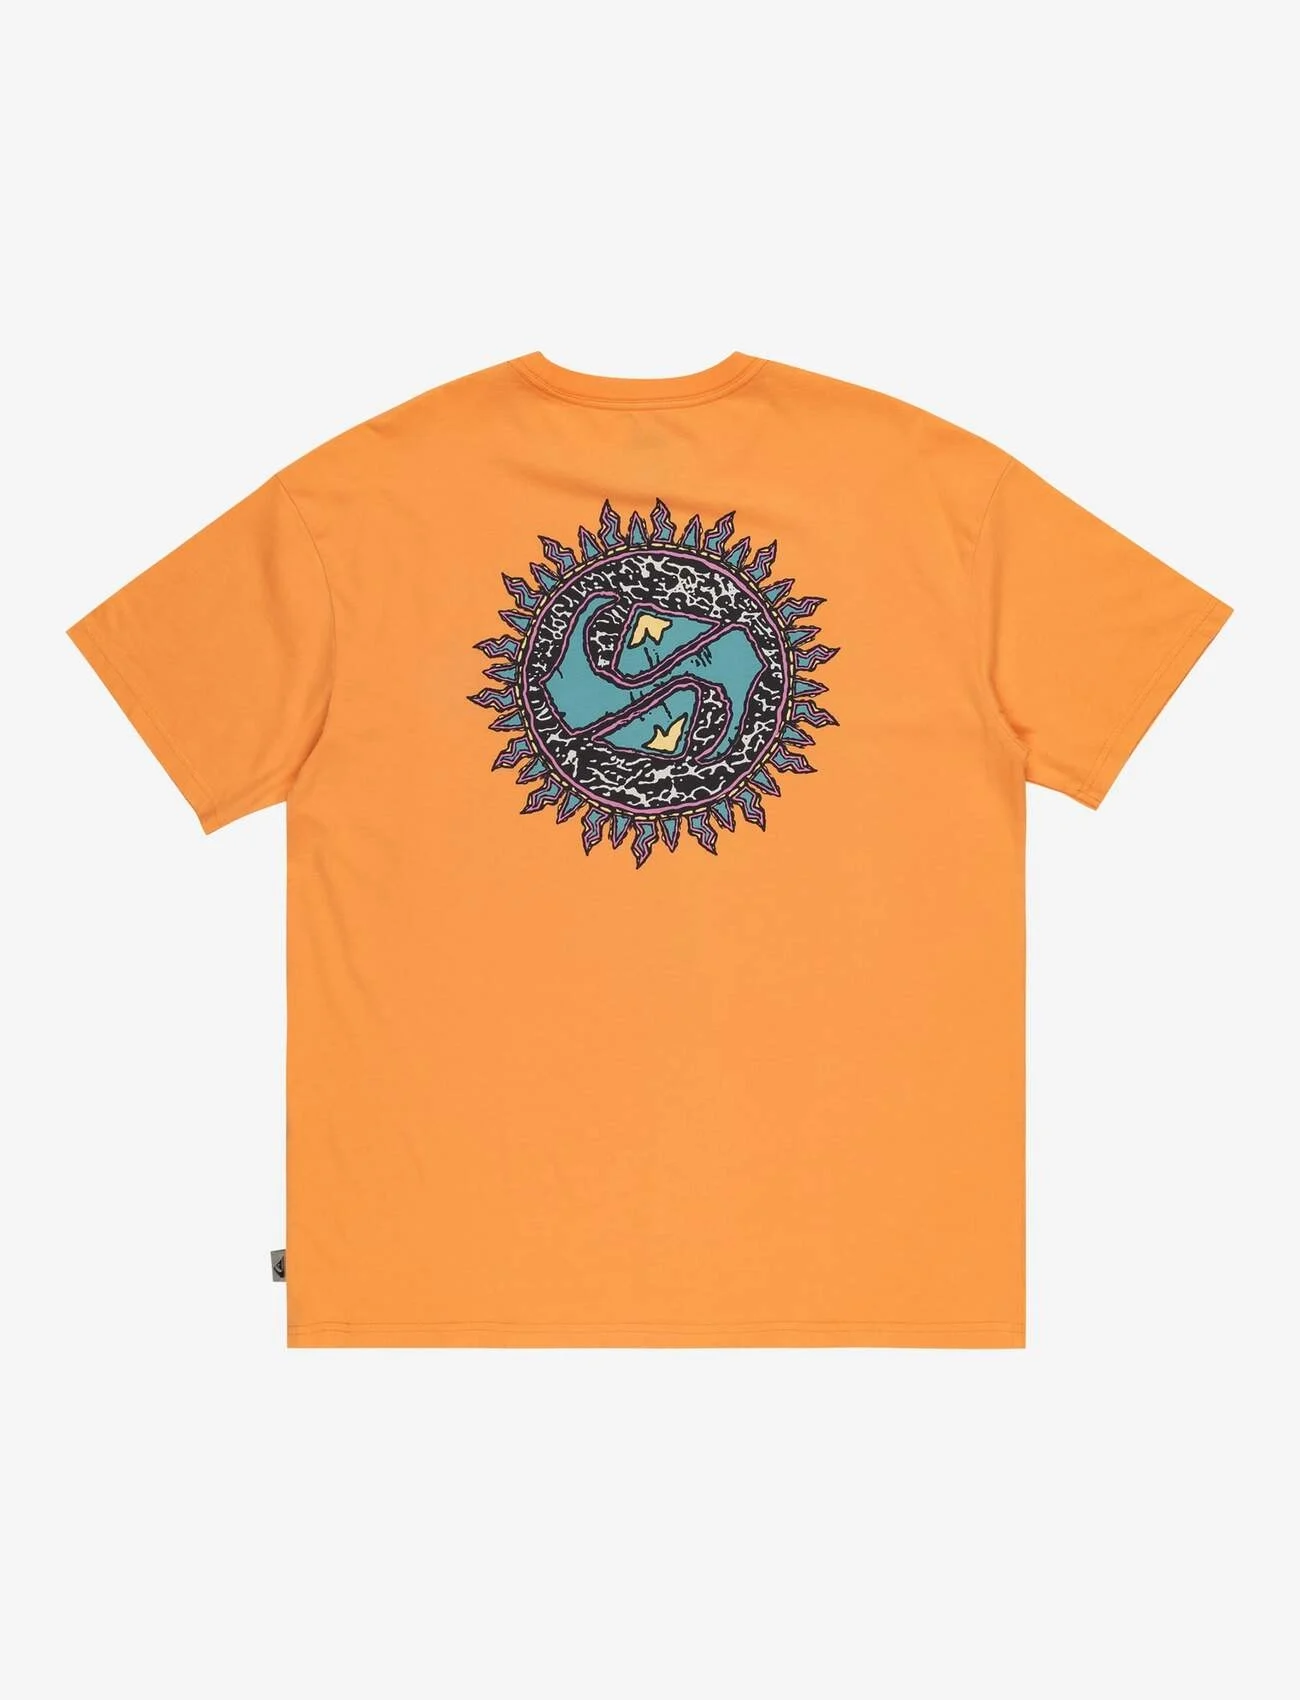 Quiksilver - SPIN CYCLE SS - lowest prices - tangerine - 1